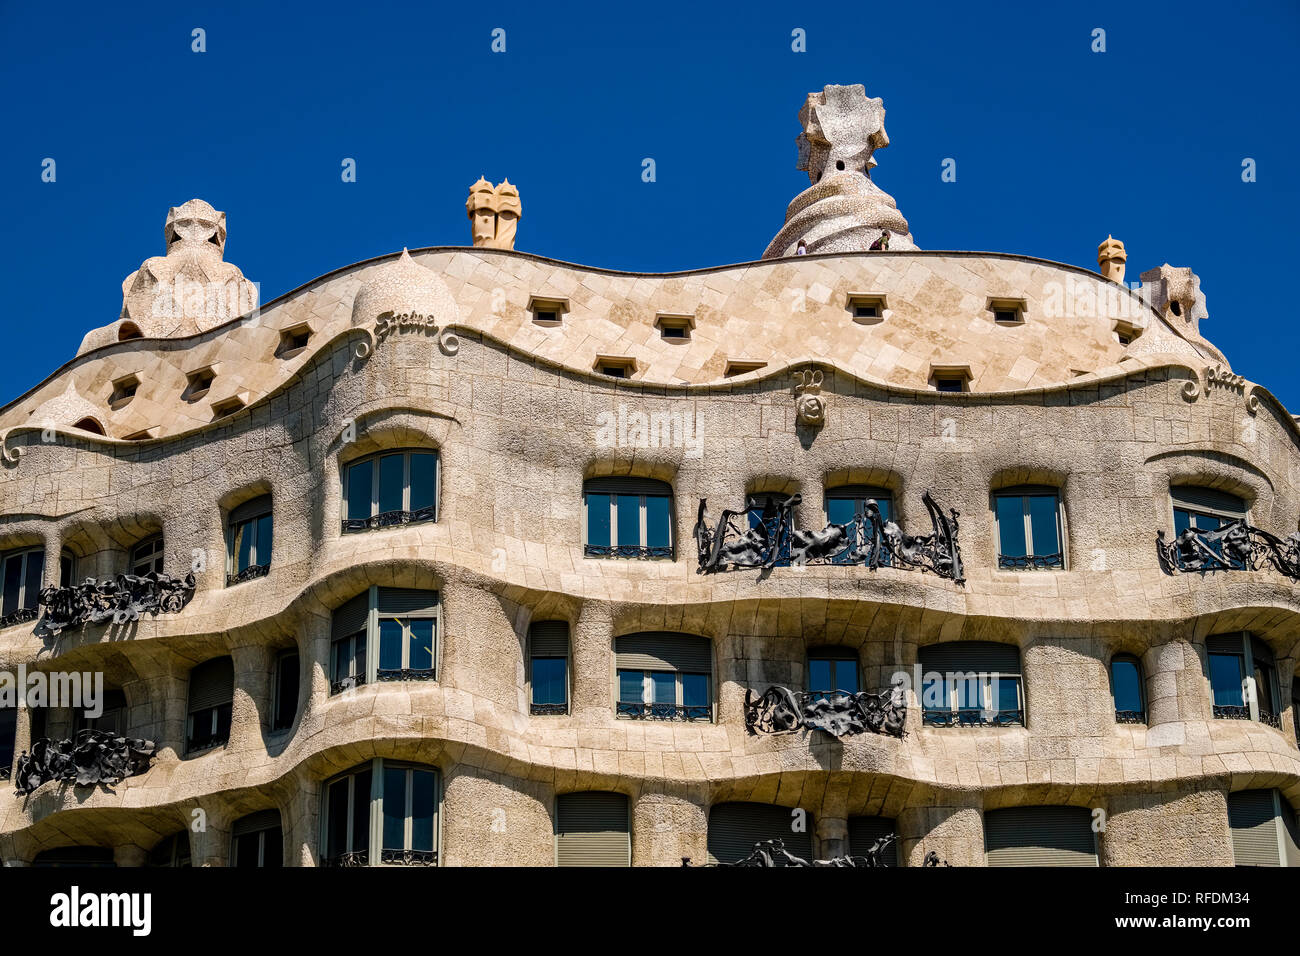 Detail of the facade of Casa Milà, architectural work of Antoni Gaudí Stock Photo